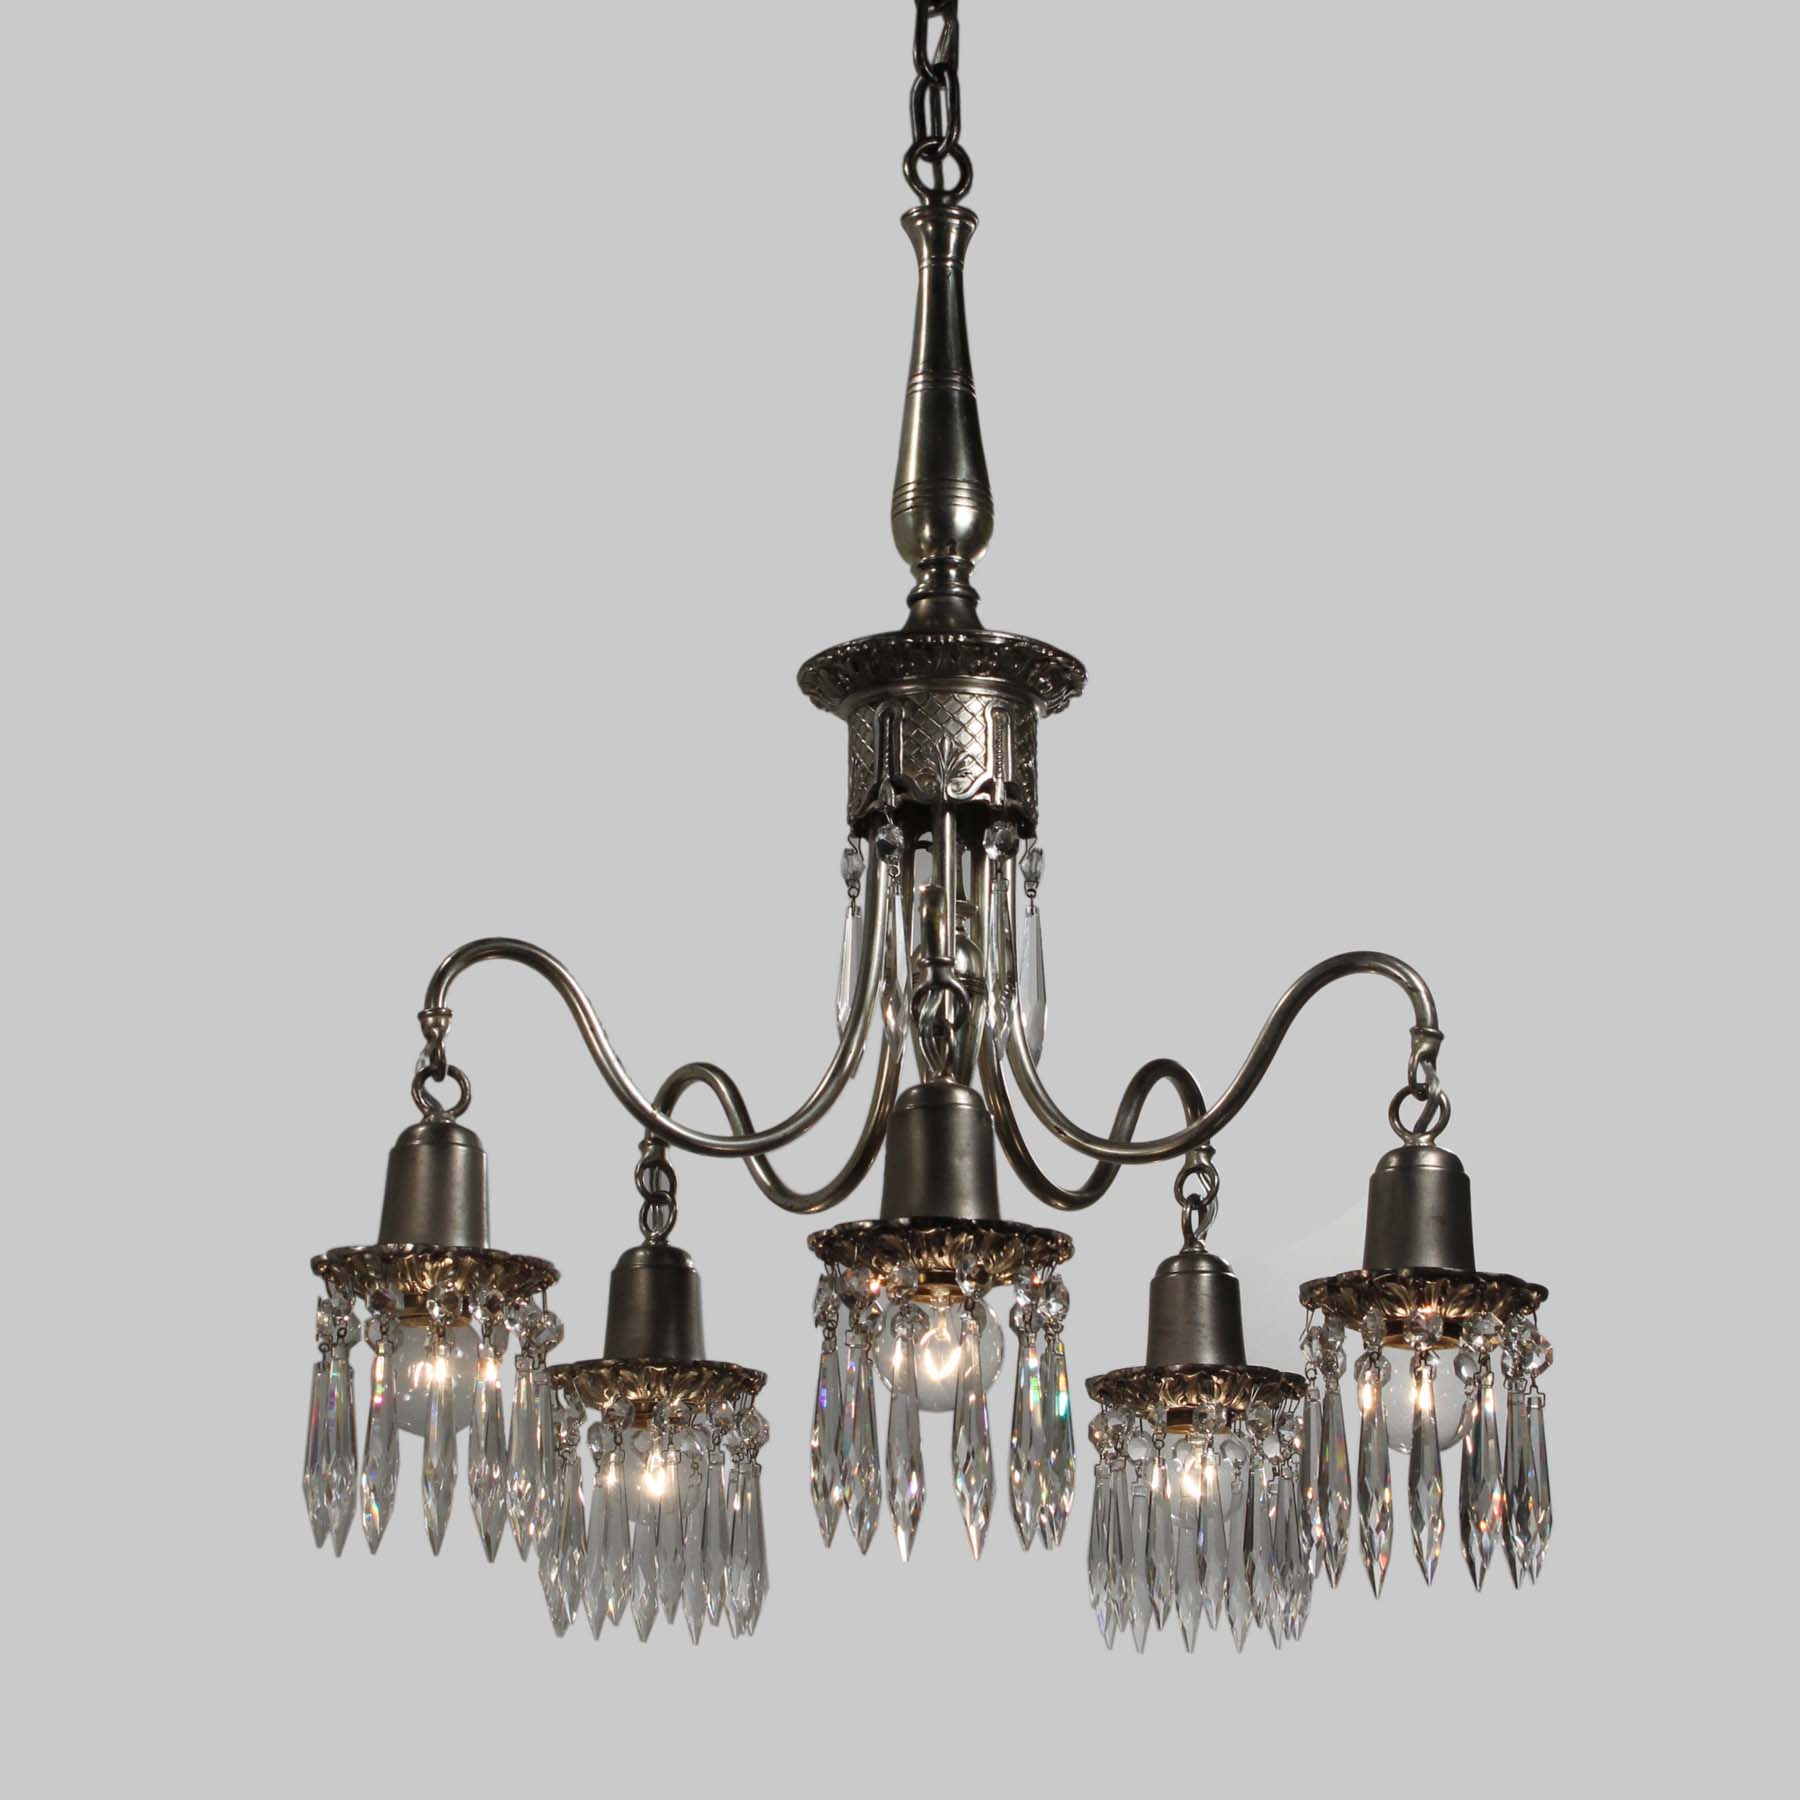 SOLD Antique Neoclassical Silver Plate Chandelier with Prisms, Star Chandelier Co. -69064